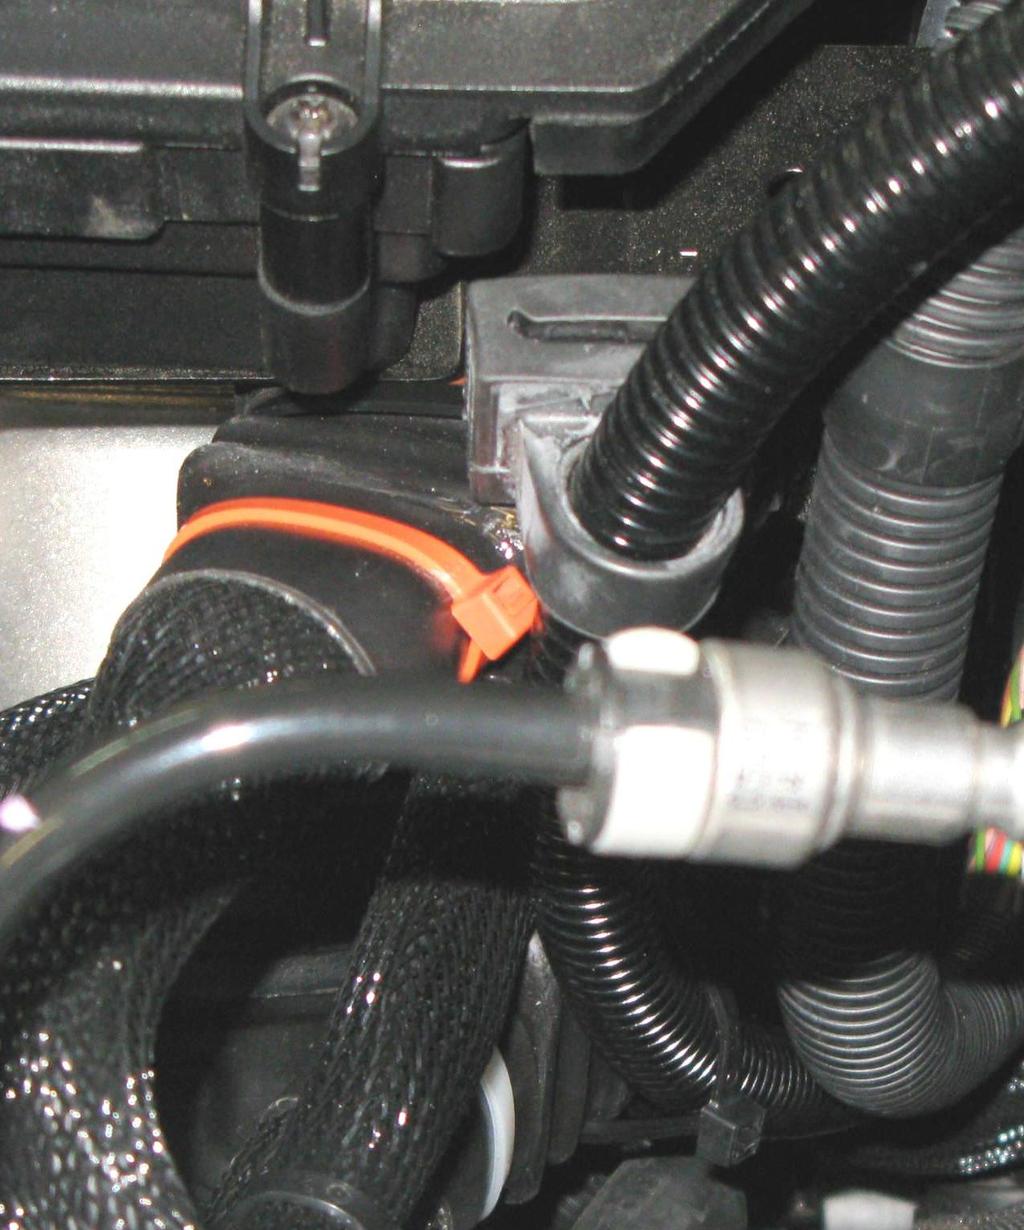 attached to bracket as shown in figure 27. Lower connector 26.